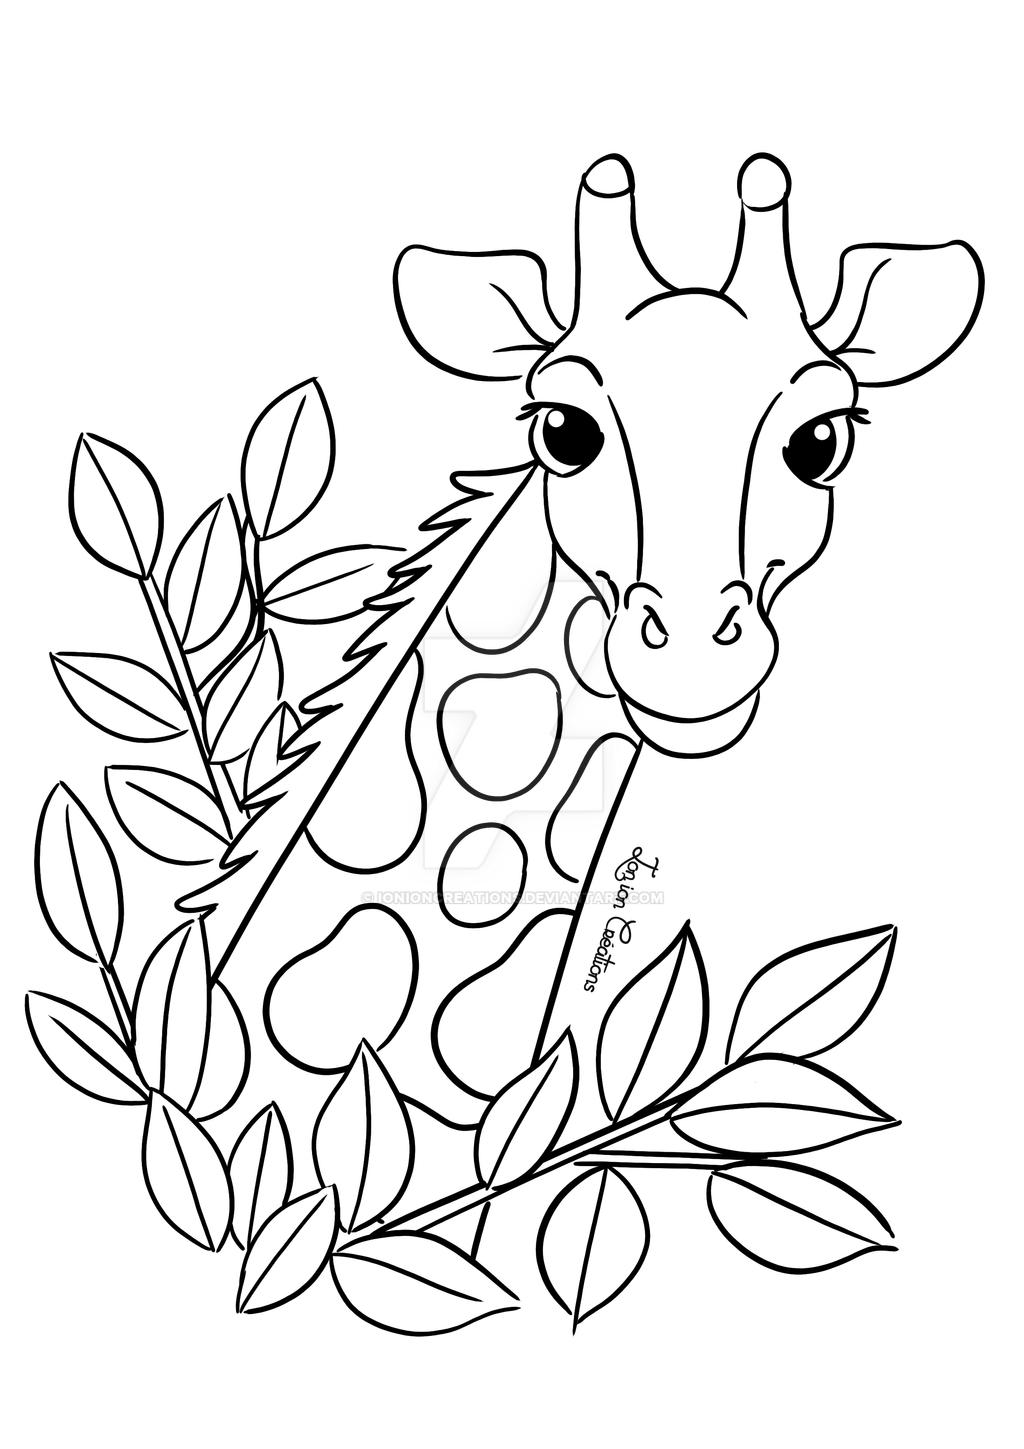 Coloriage girafe by IonionCreations on DeviantArt